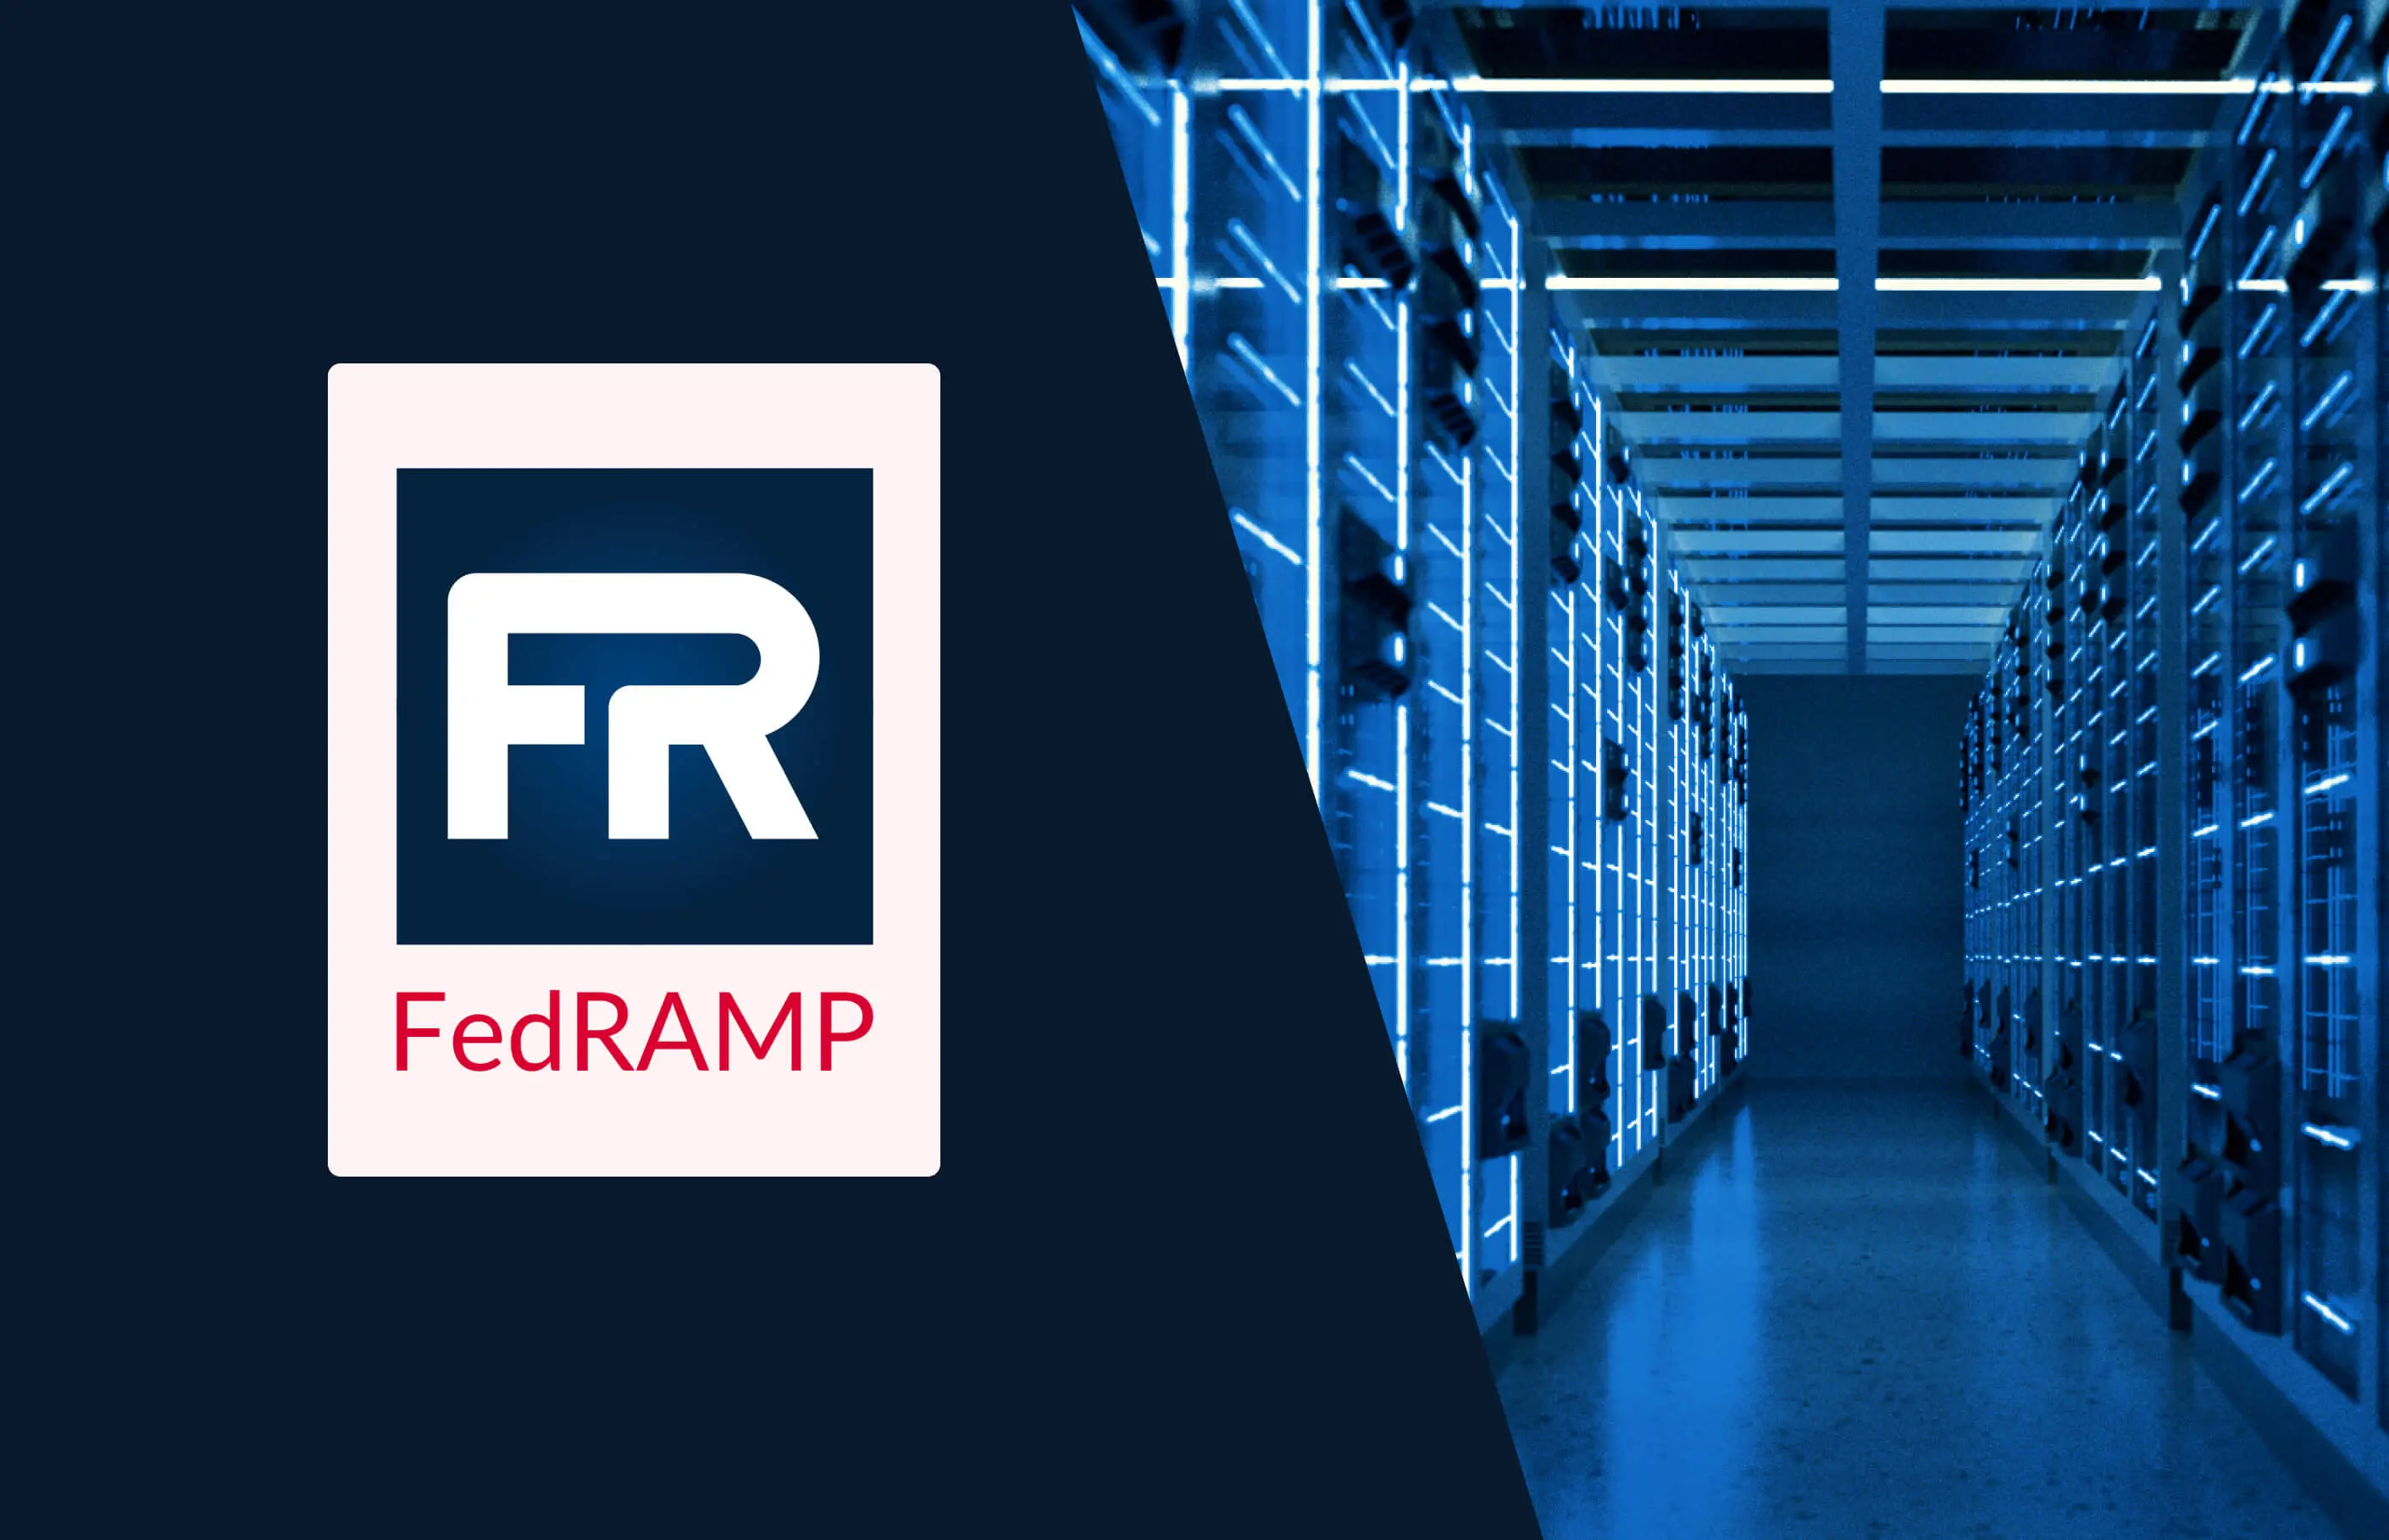 FedRAMP certification symbol next to an image of a server room